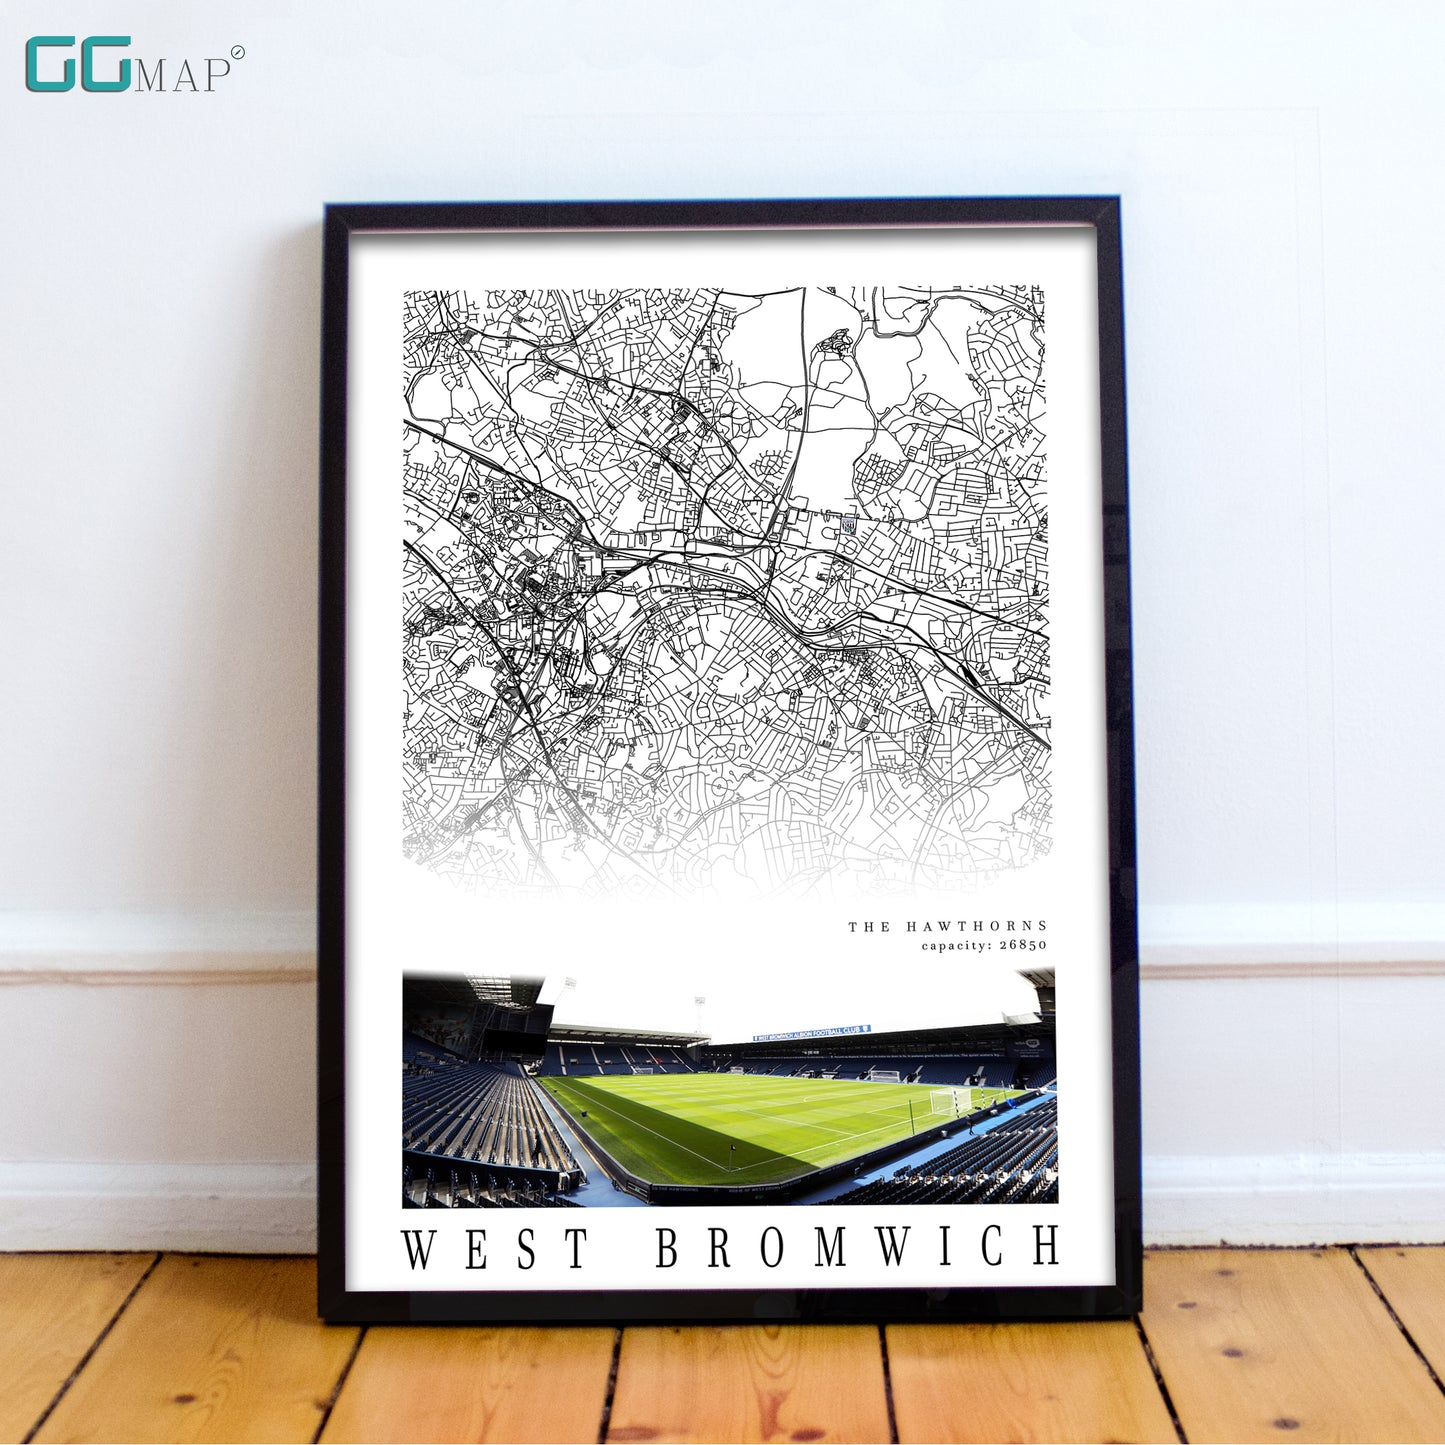 Map of West Bromwich- Wba The Hawthorns